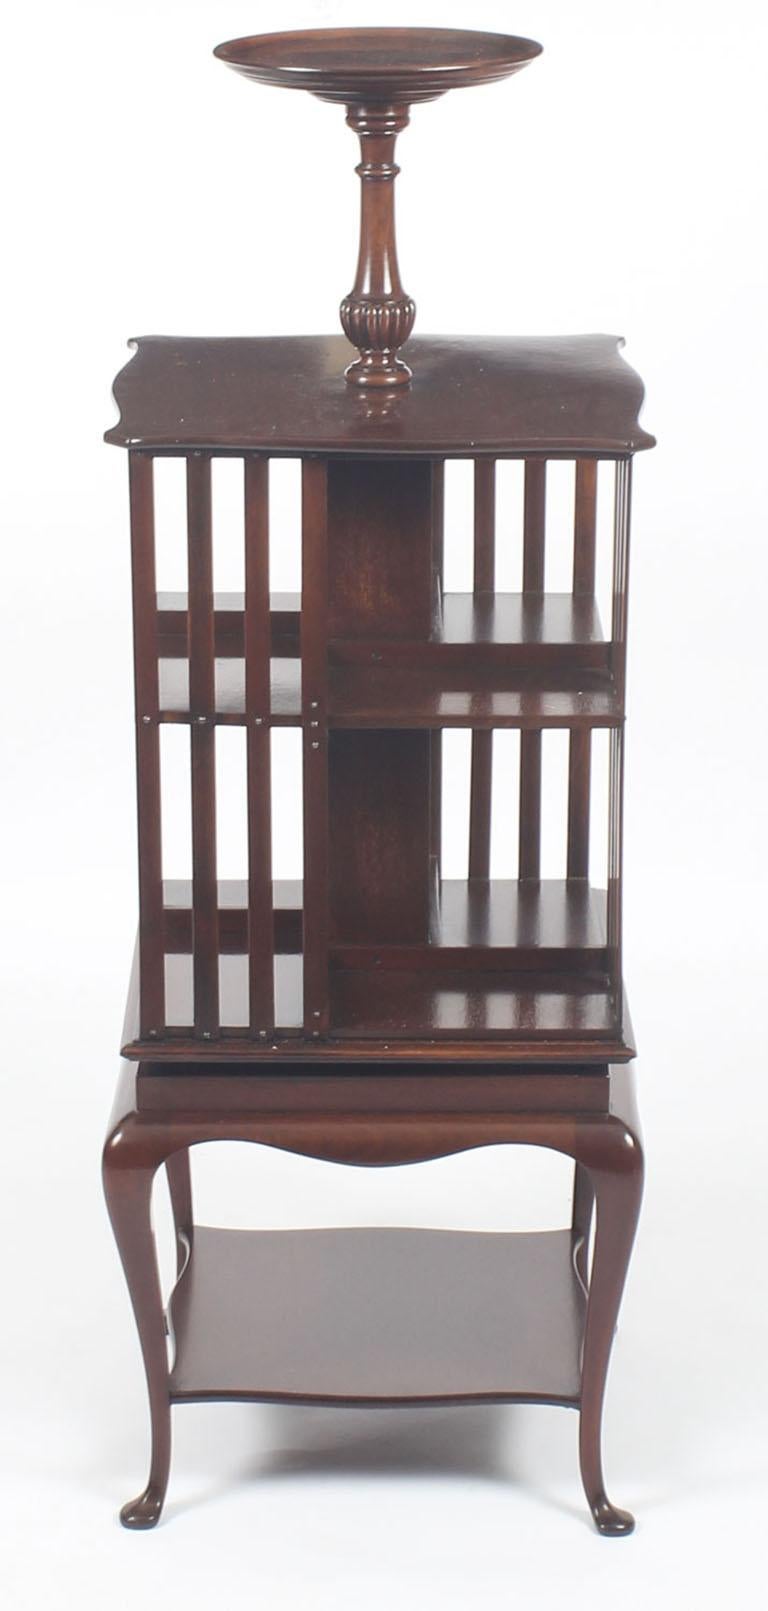 Early 20th Century Mahogany Revolving Bookcase Book Stand with Pedestal 1